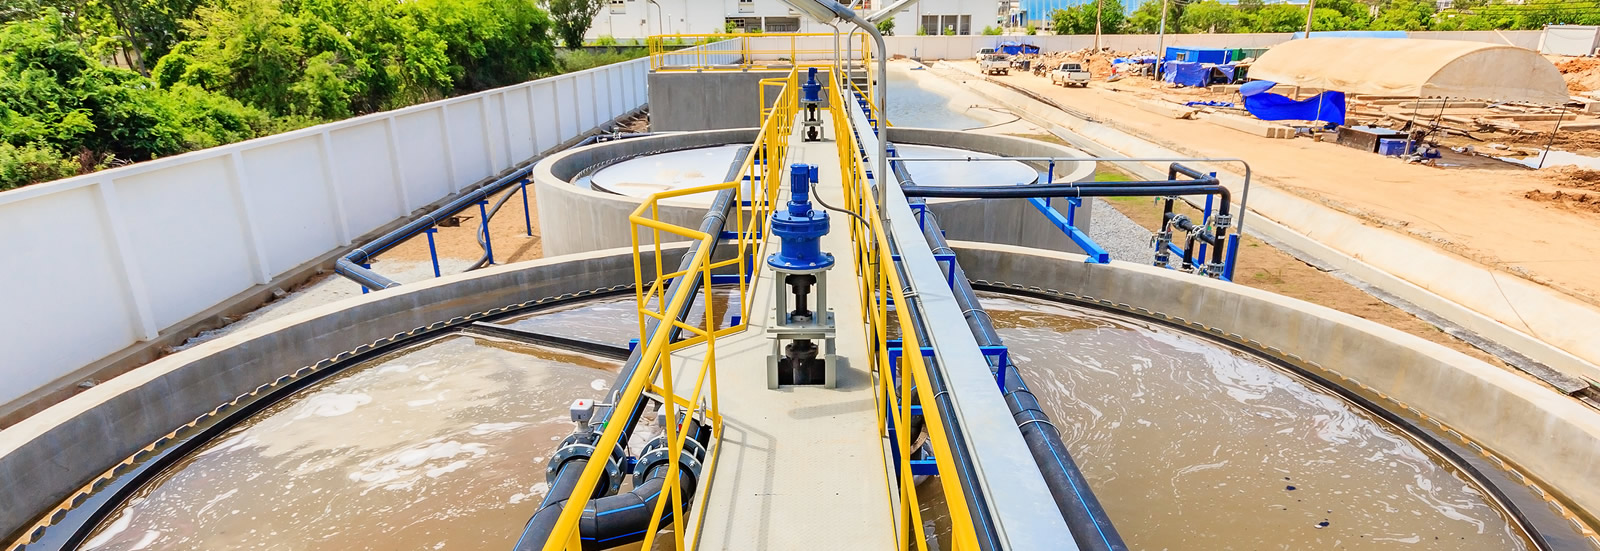 Wastewater Treatment Process Equipment